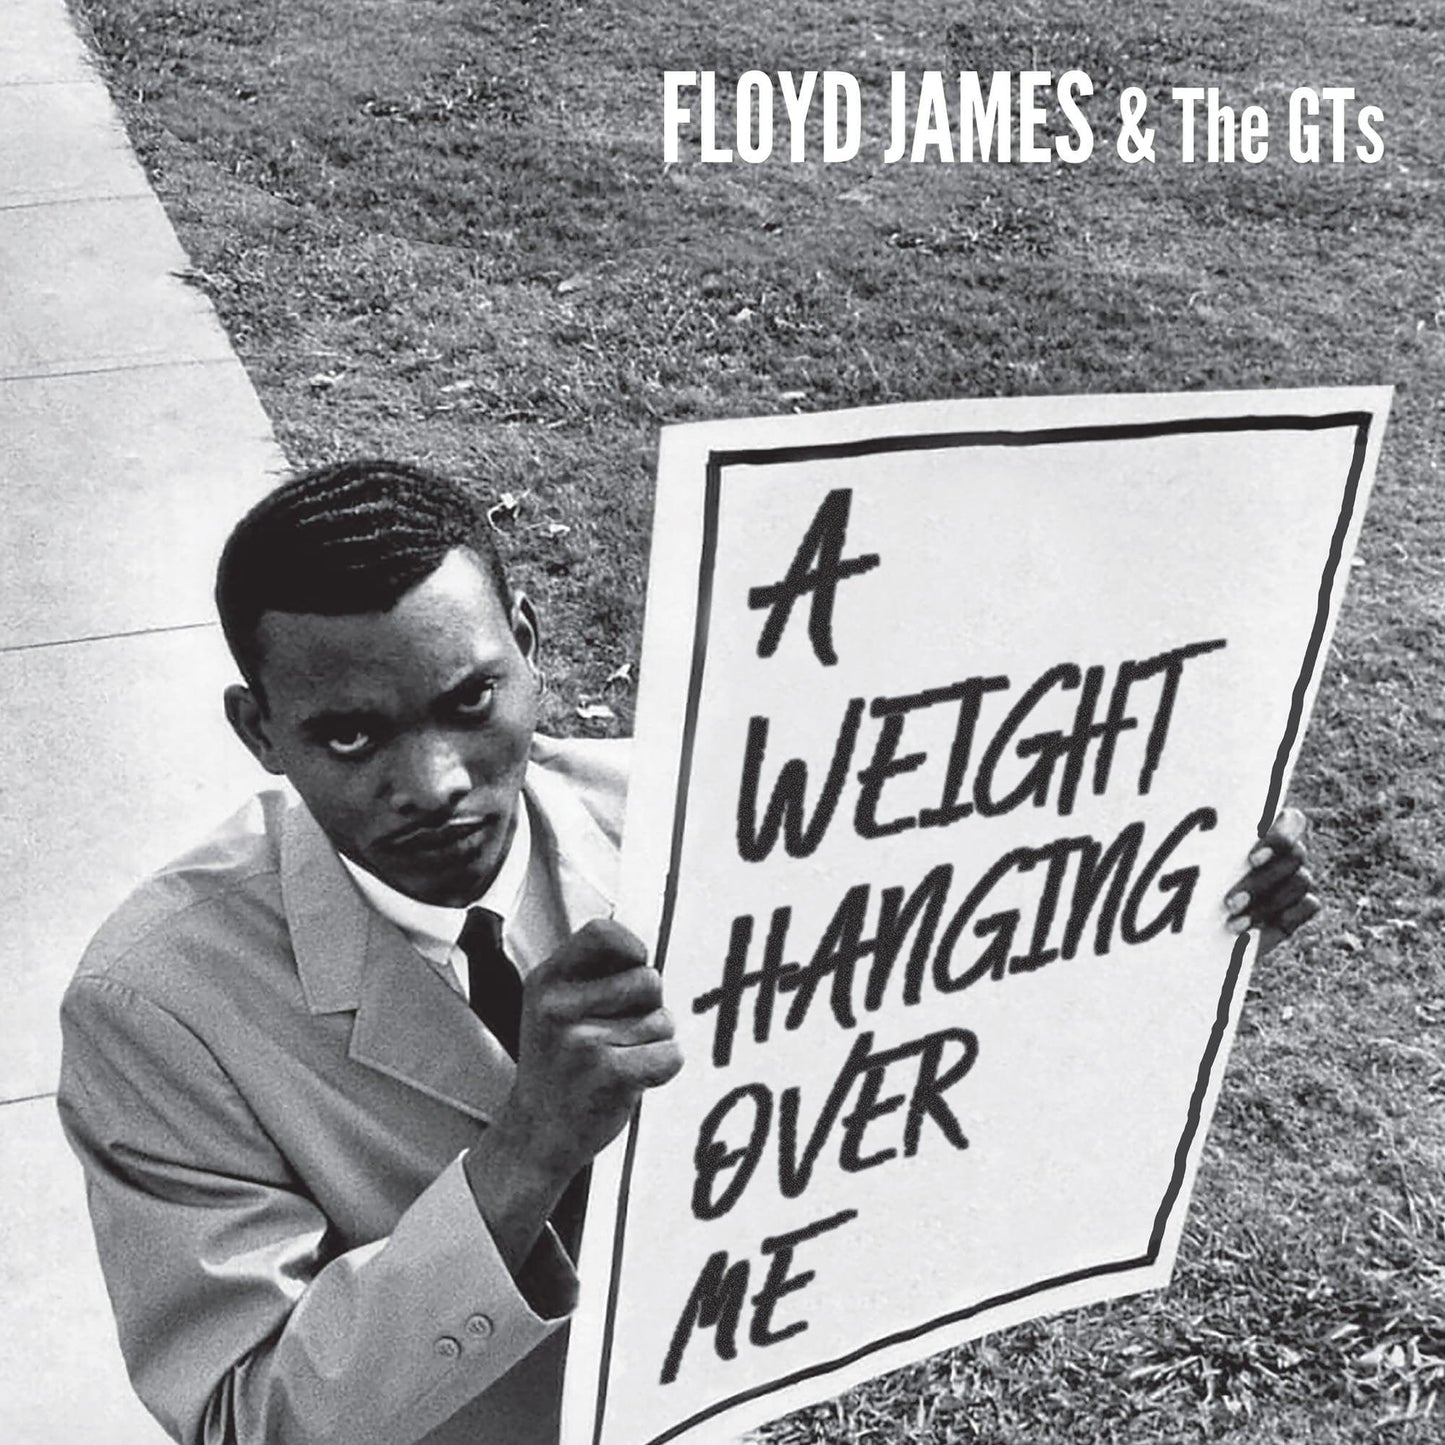 FLOYD JAMES - A Weight (Hanging Over Me)